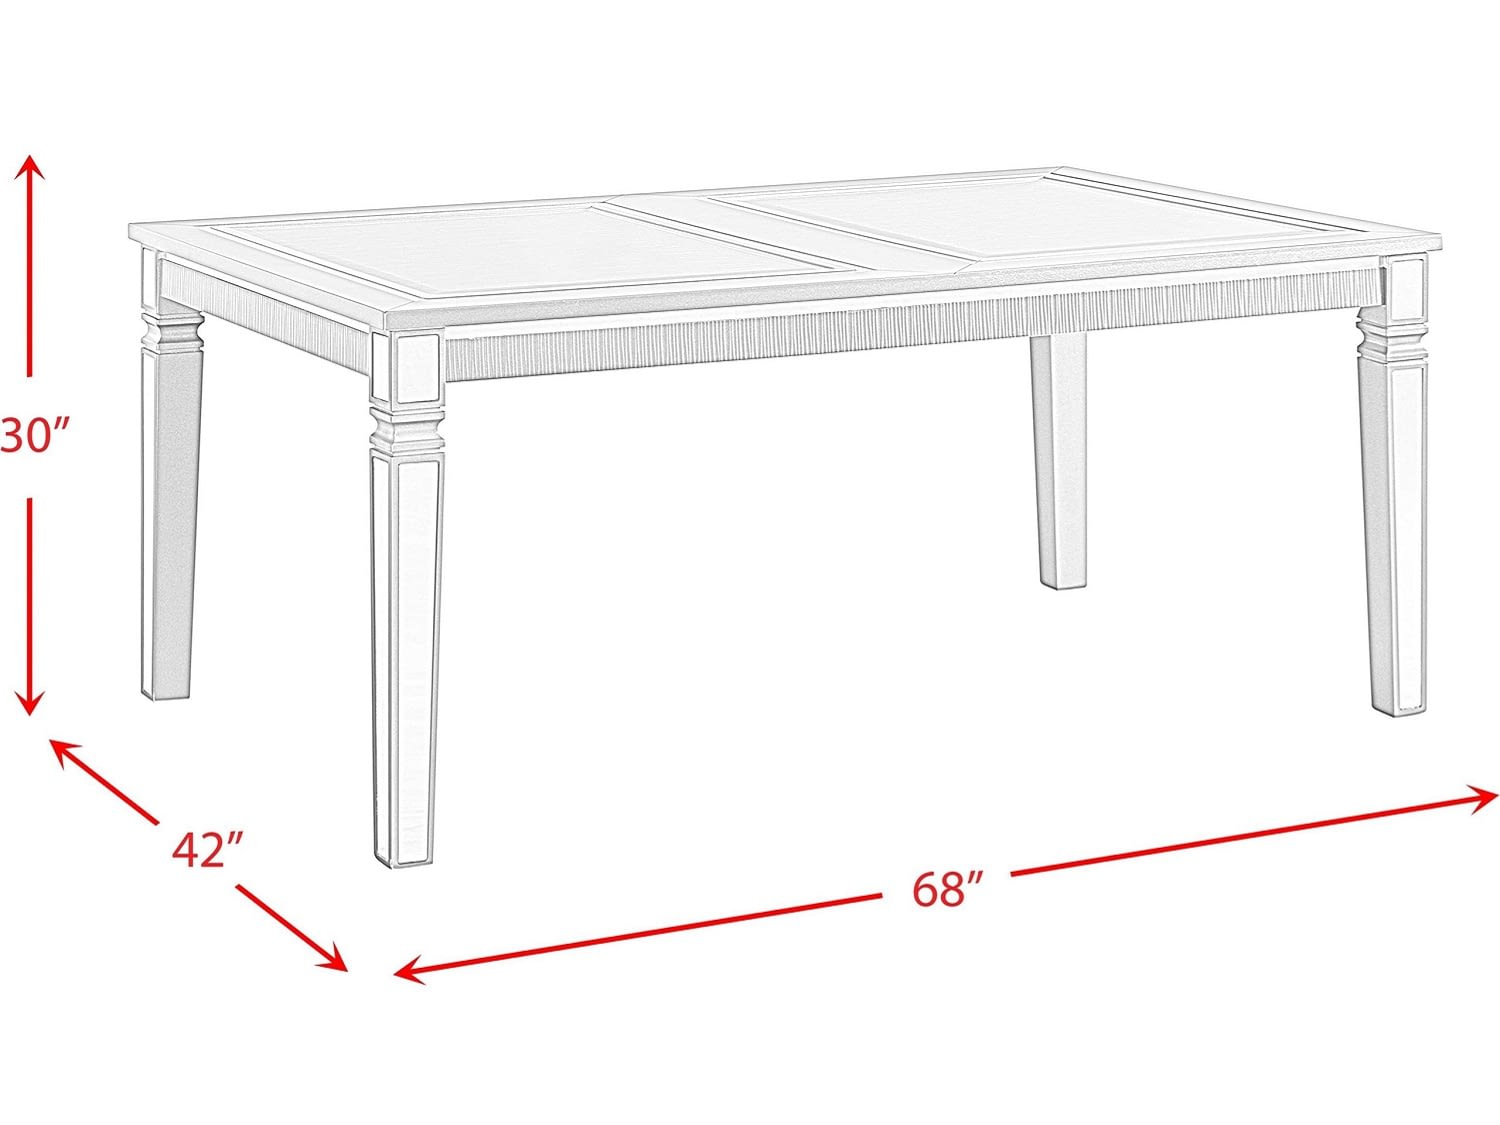 ATLEE Dining Table - Dimensions